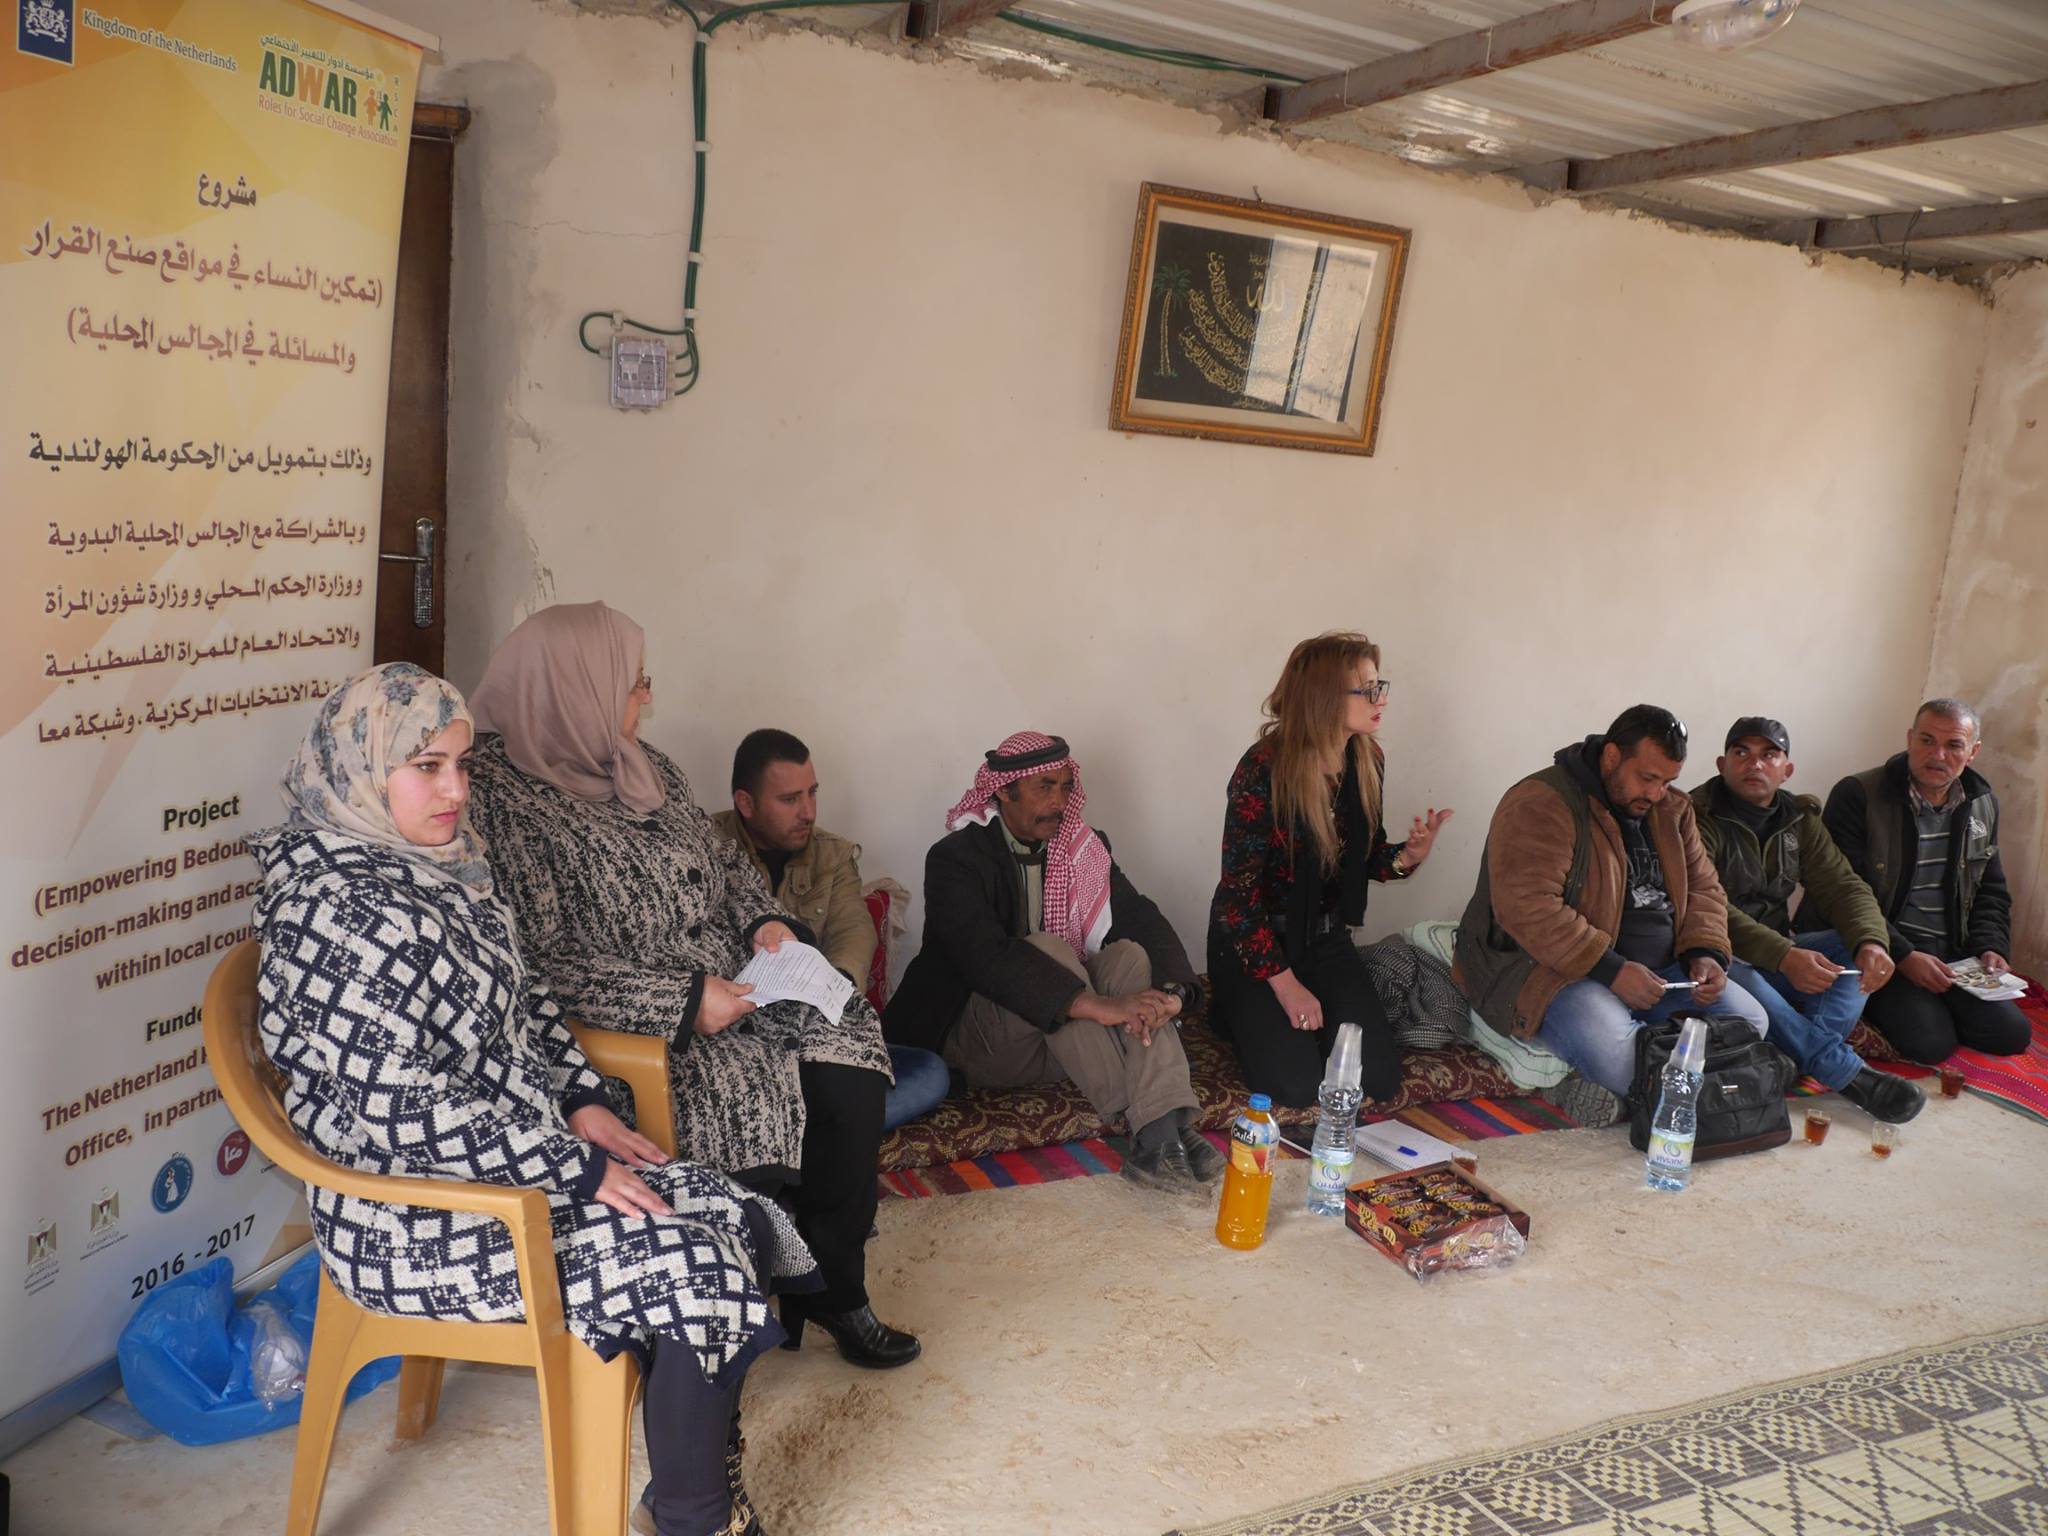  The fourth dialogue session with an official held at Dkaika Bedouin community